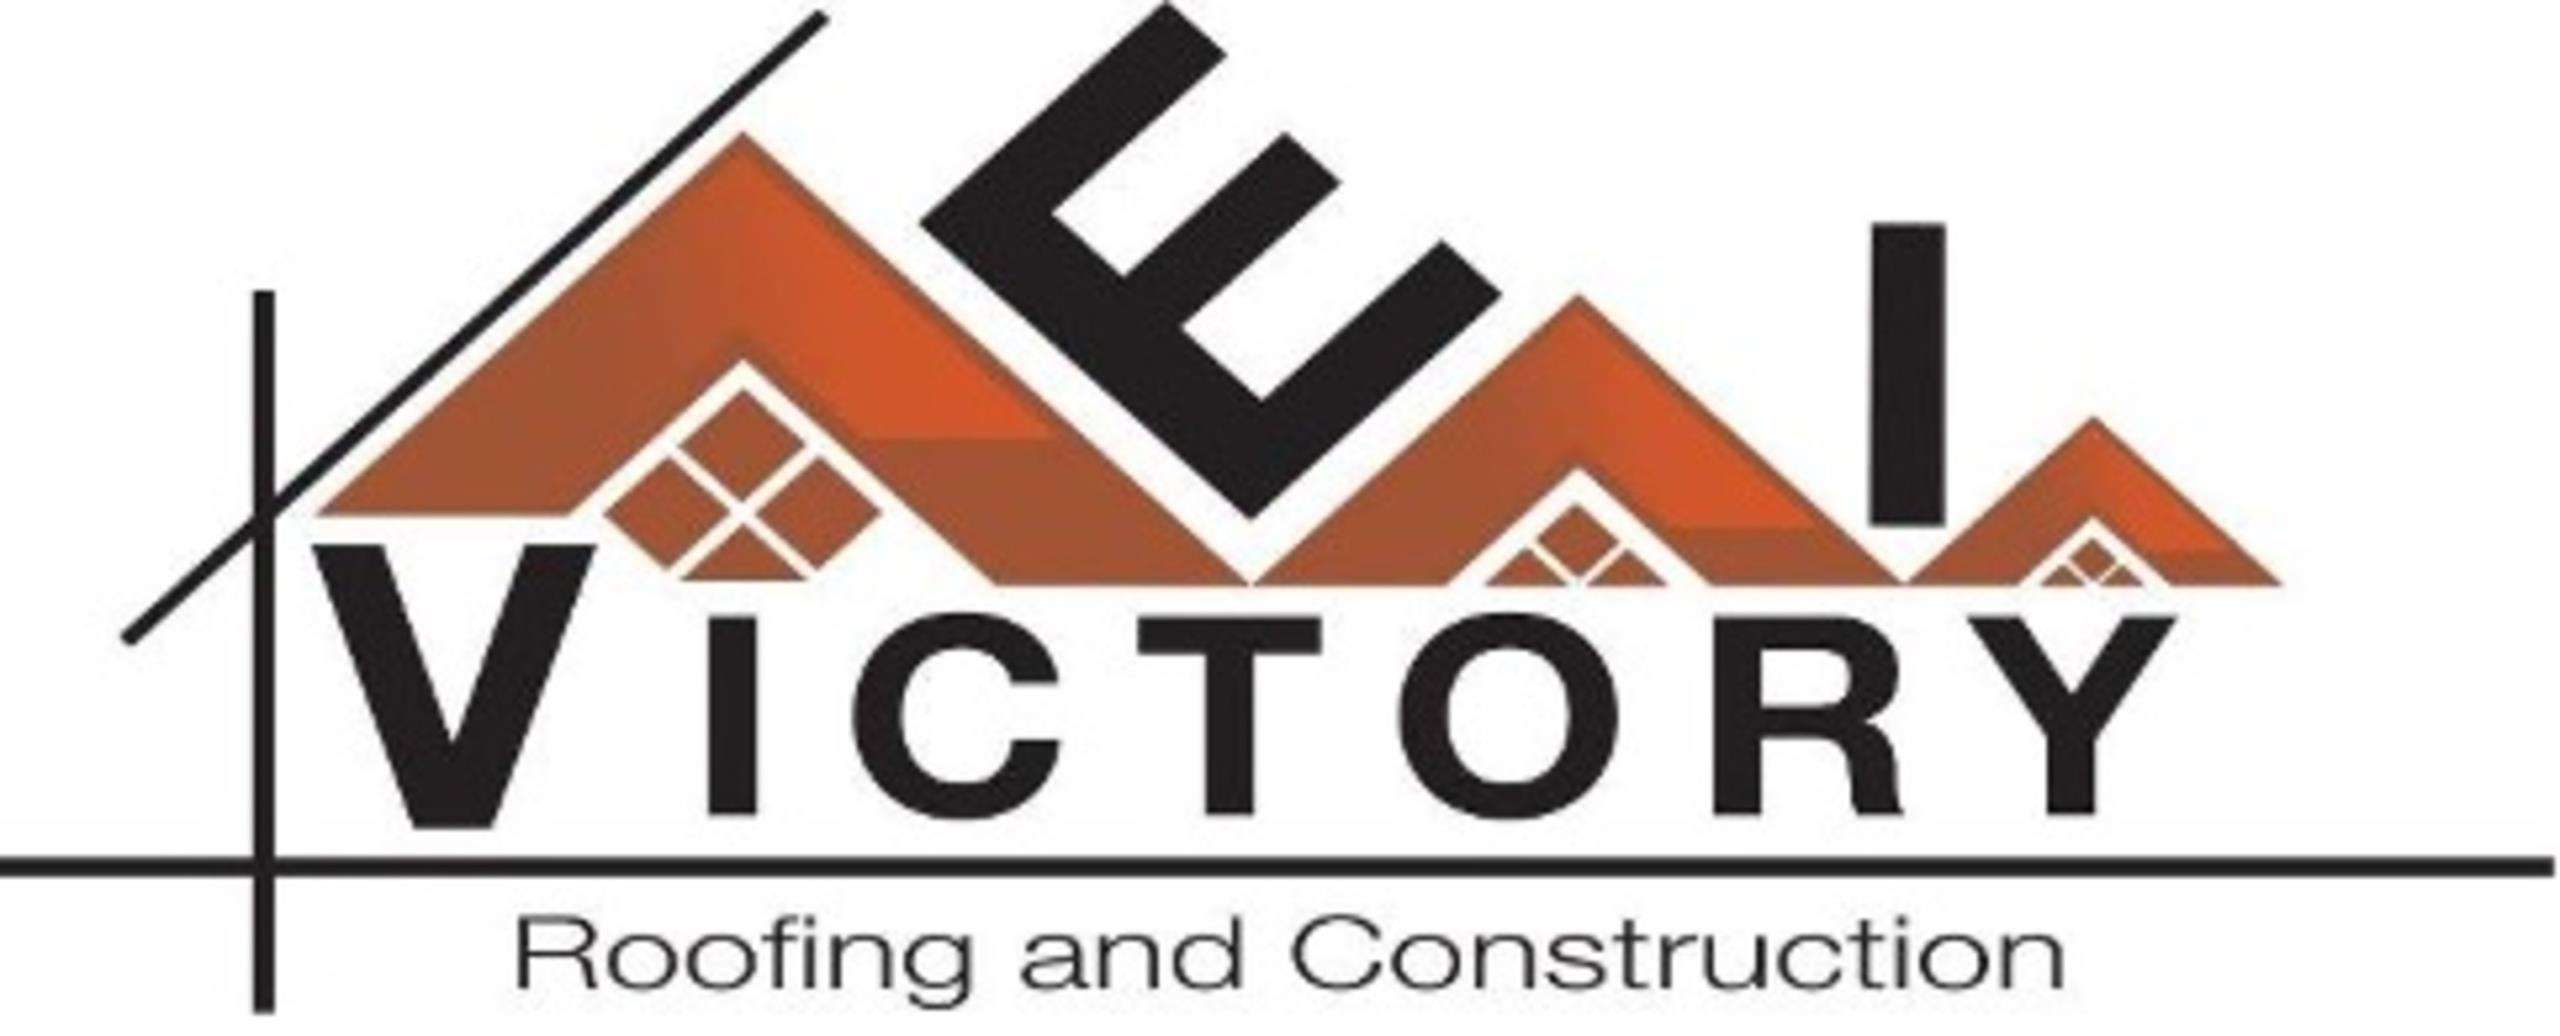 Victory E & I Roofing and Construction, LLC Logo